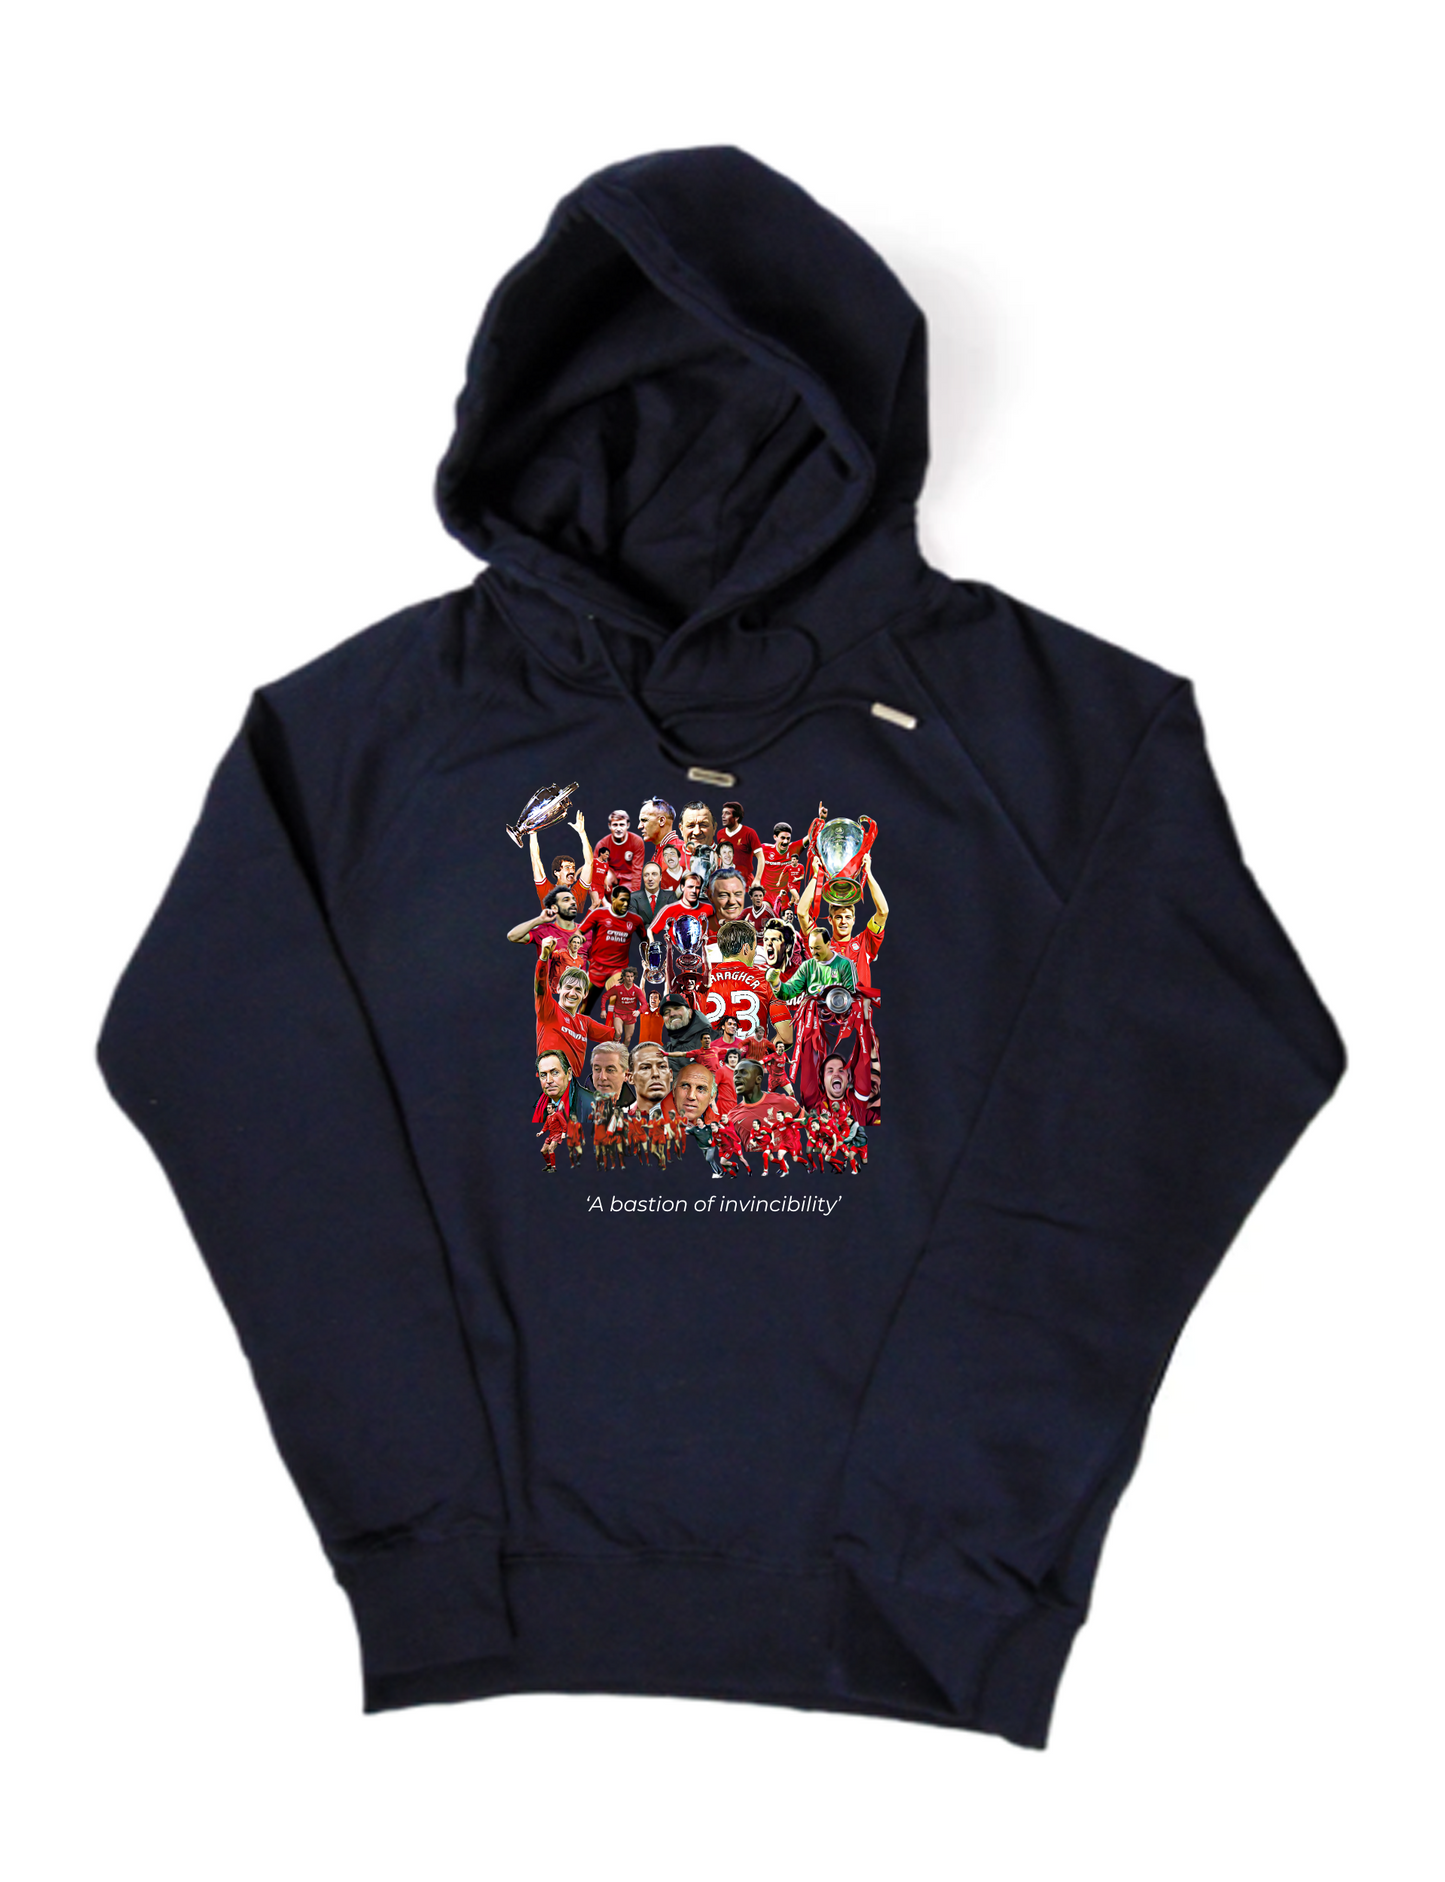 ‘A bastion of invincibility’ Hoodie - Navy